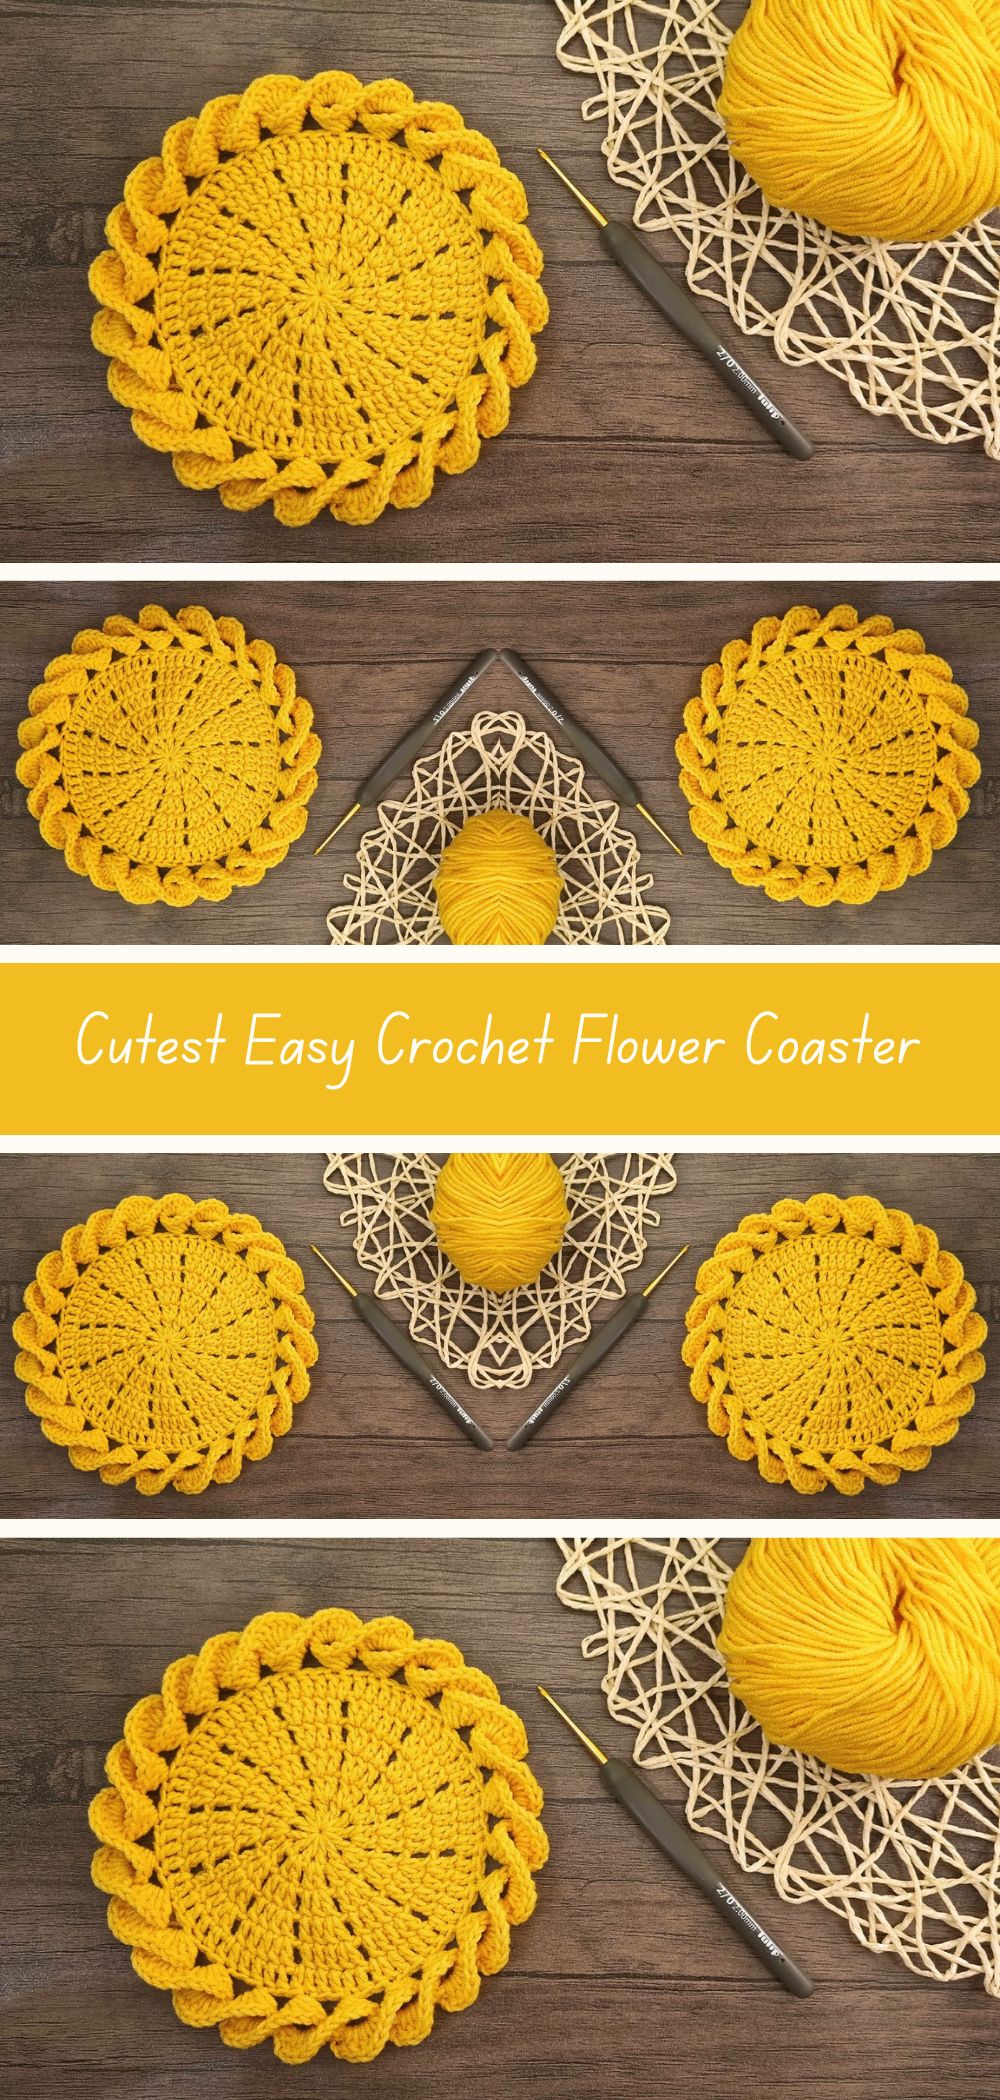 Cutest Easy Crochet Flower Coaster Pattern - Create adorable flower-shaped coasters with this easy-to-follow crochet pattern